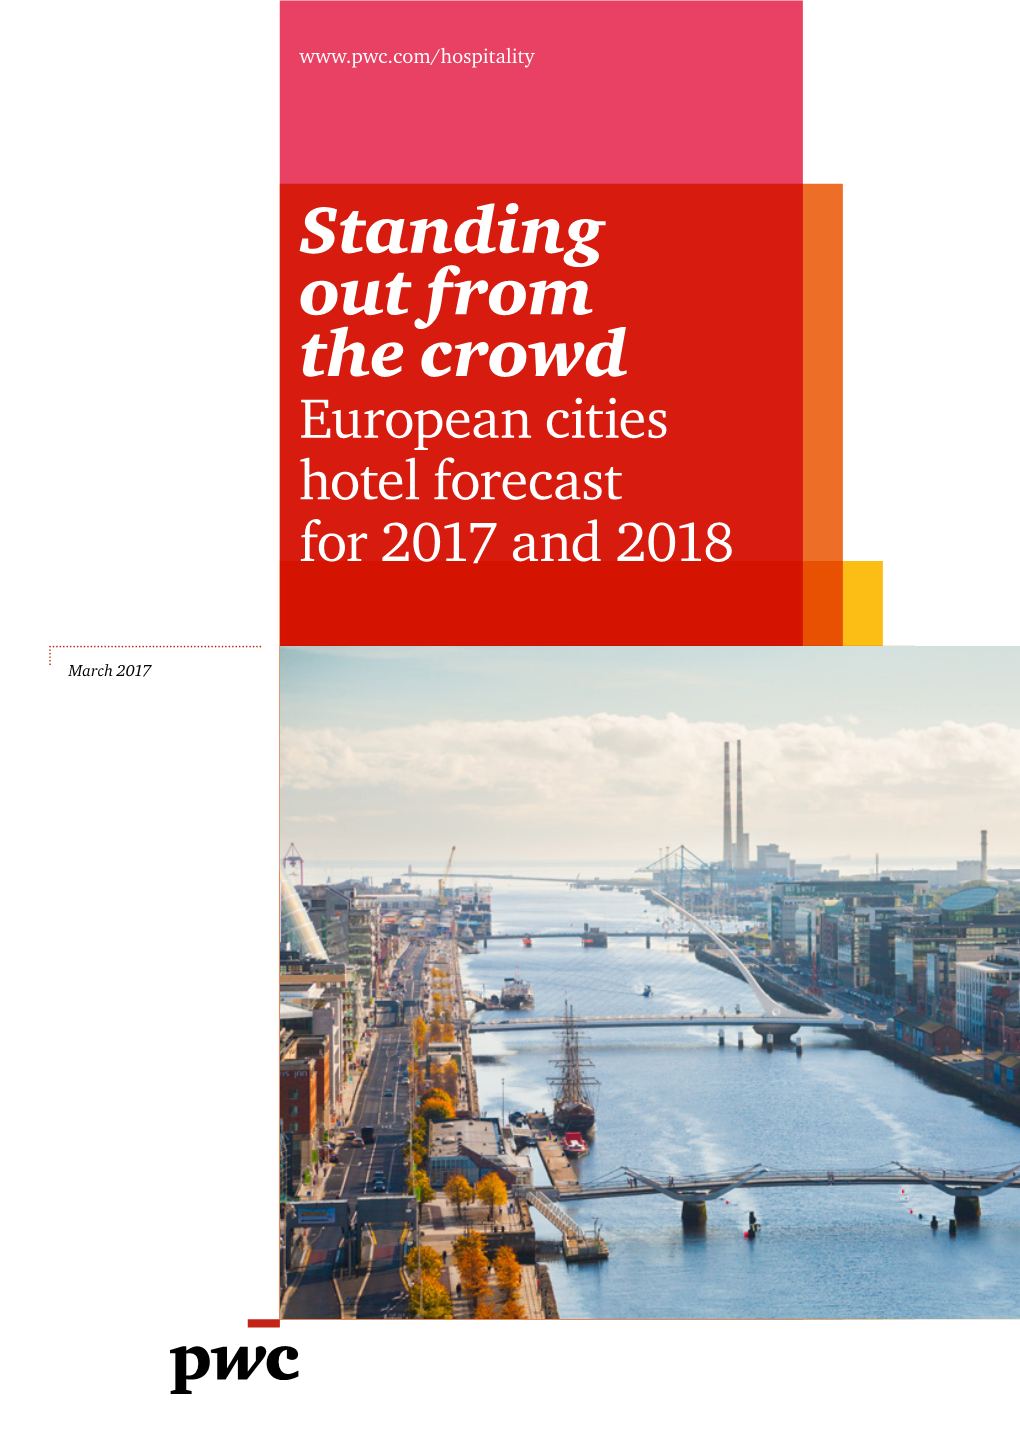 European Cities Hotel Forecast for 2017 and 2018